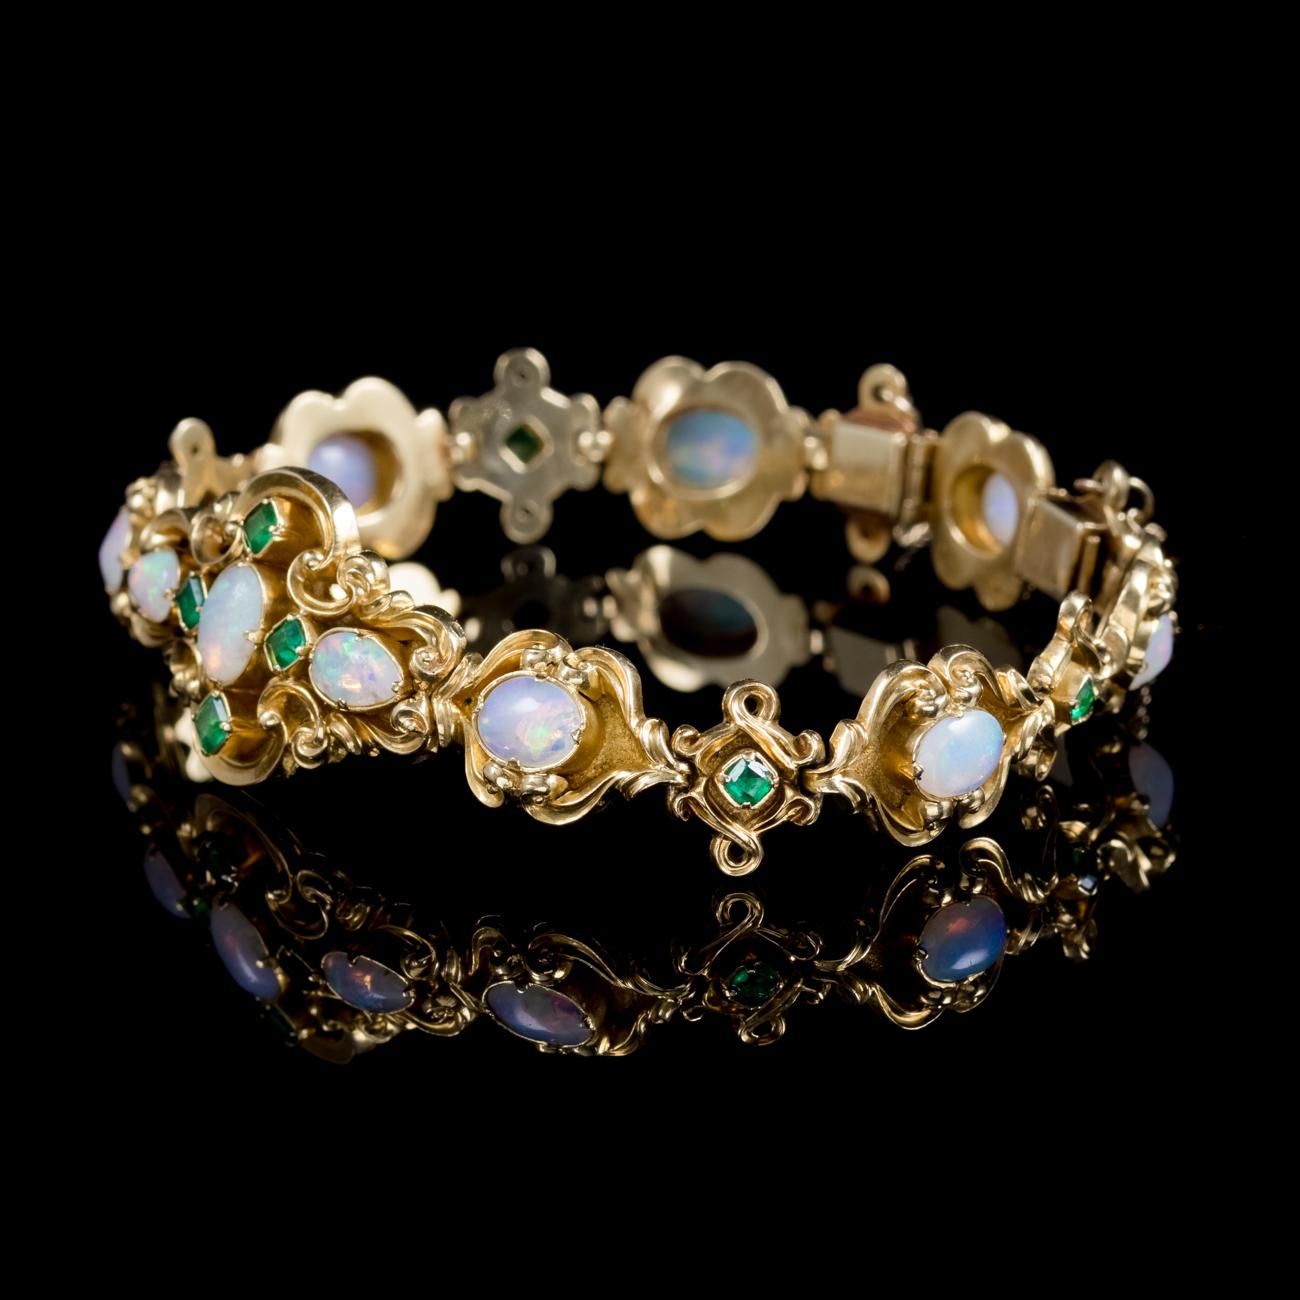 A grand antique Victorian bracelet decorated with beautiful Opals and green Emeralds. The Opals are a kaleidoscope of rainbow colours shimmering and changing colours with the light. They radiate blues, pinks, greens, turquoise and an inner orange.